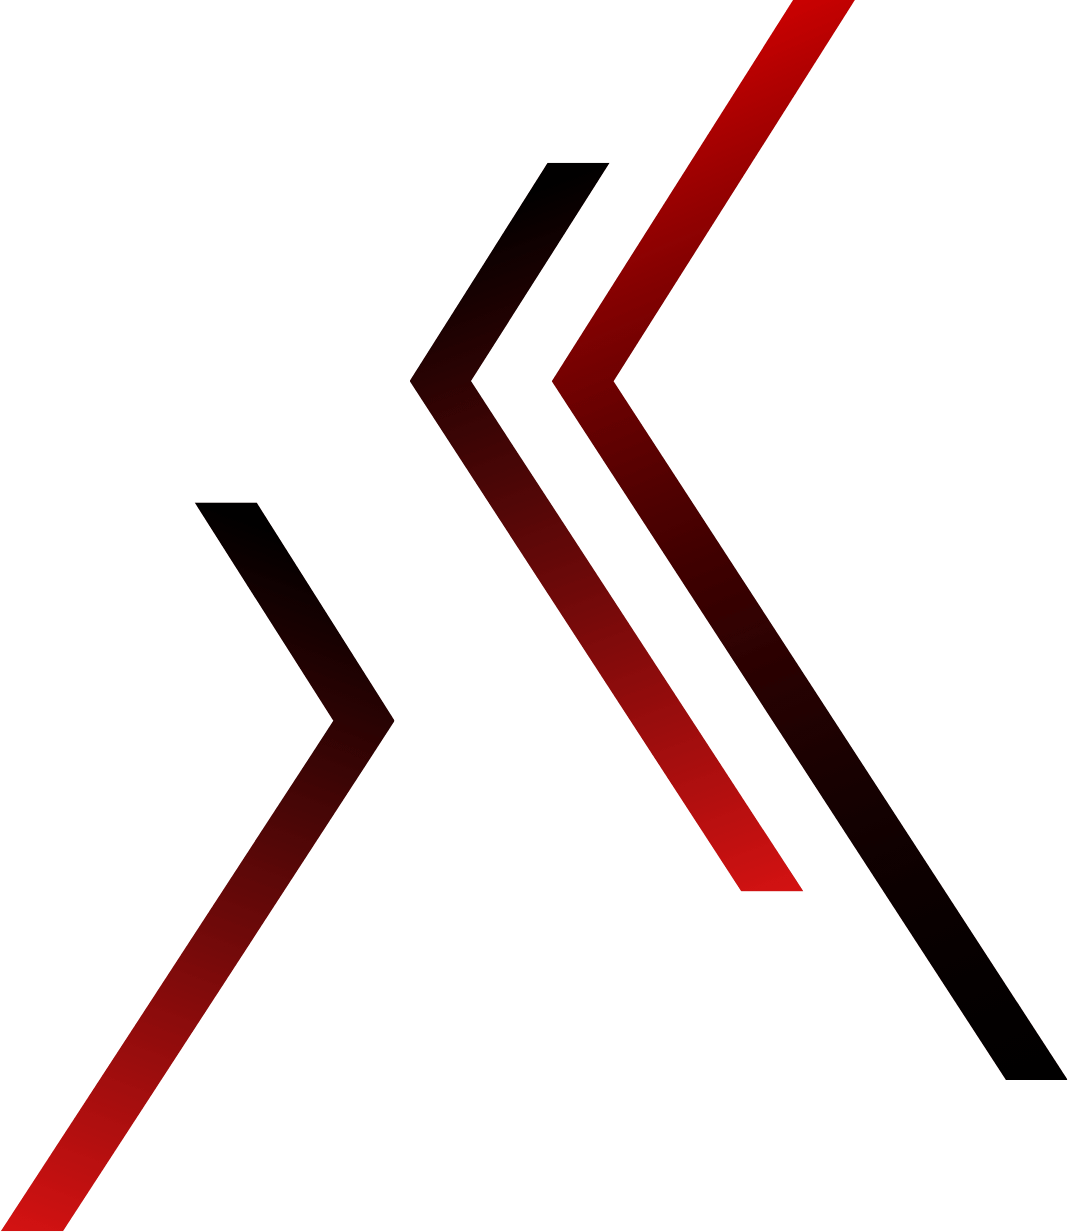 A red and black arrow logo on a black background.